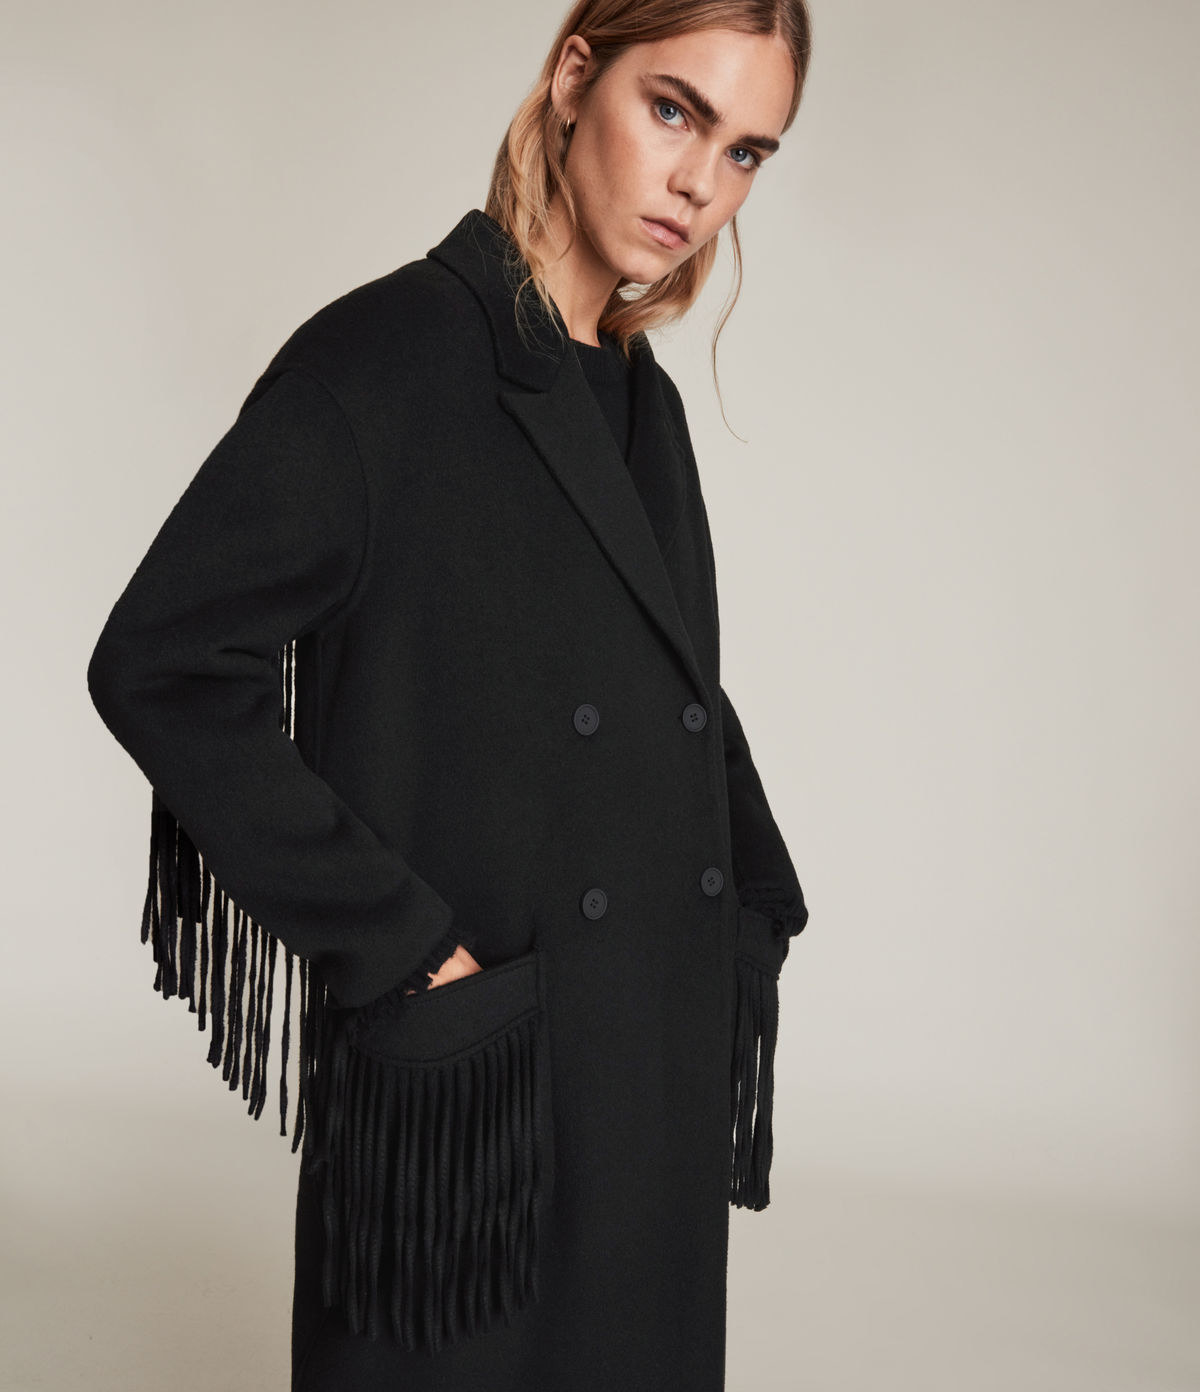 The black midi coat with double breasted buttons